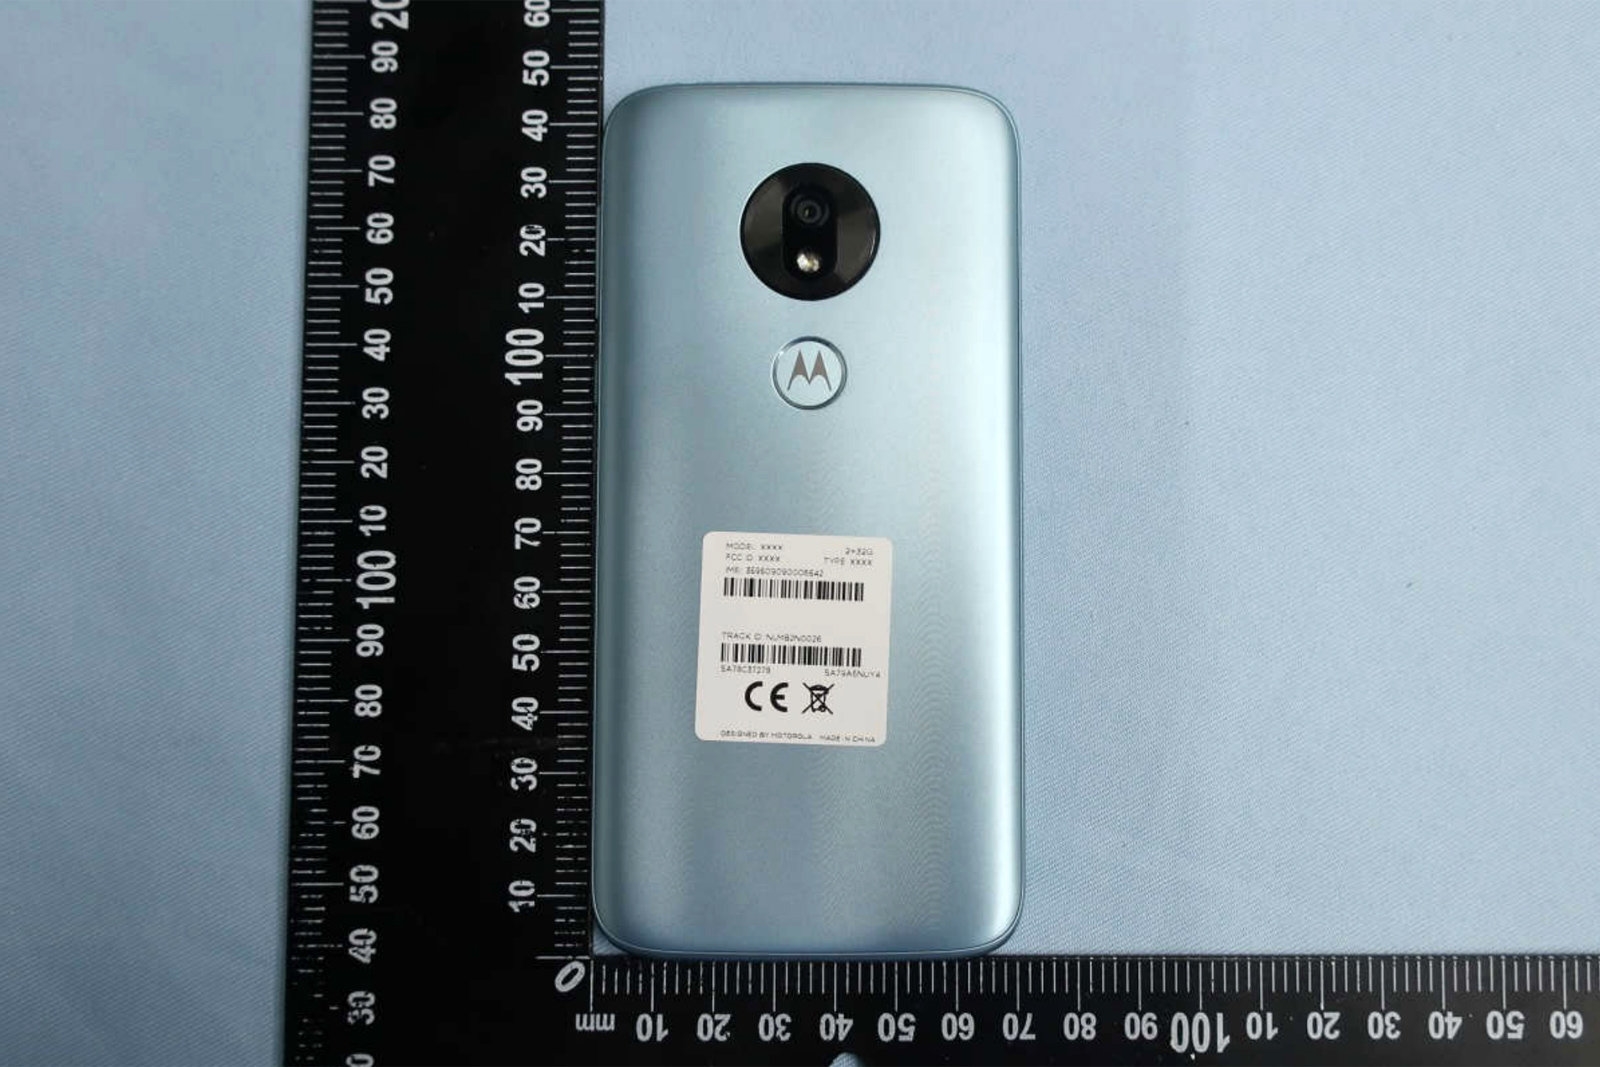 Moto G7 Play surfaces at the FCC with a display notch | DeviceDaily.com